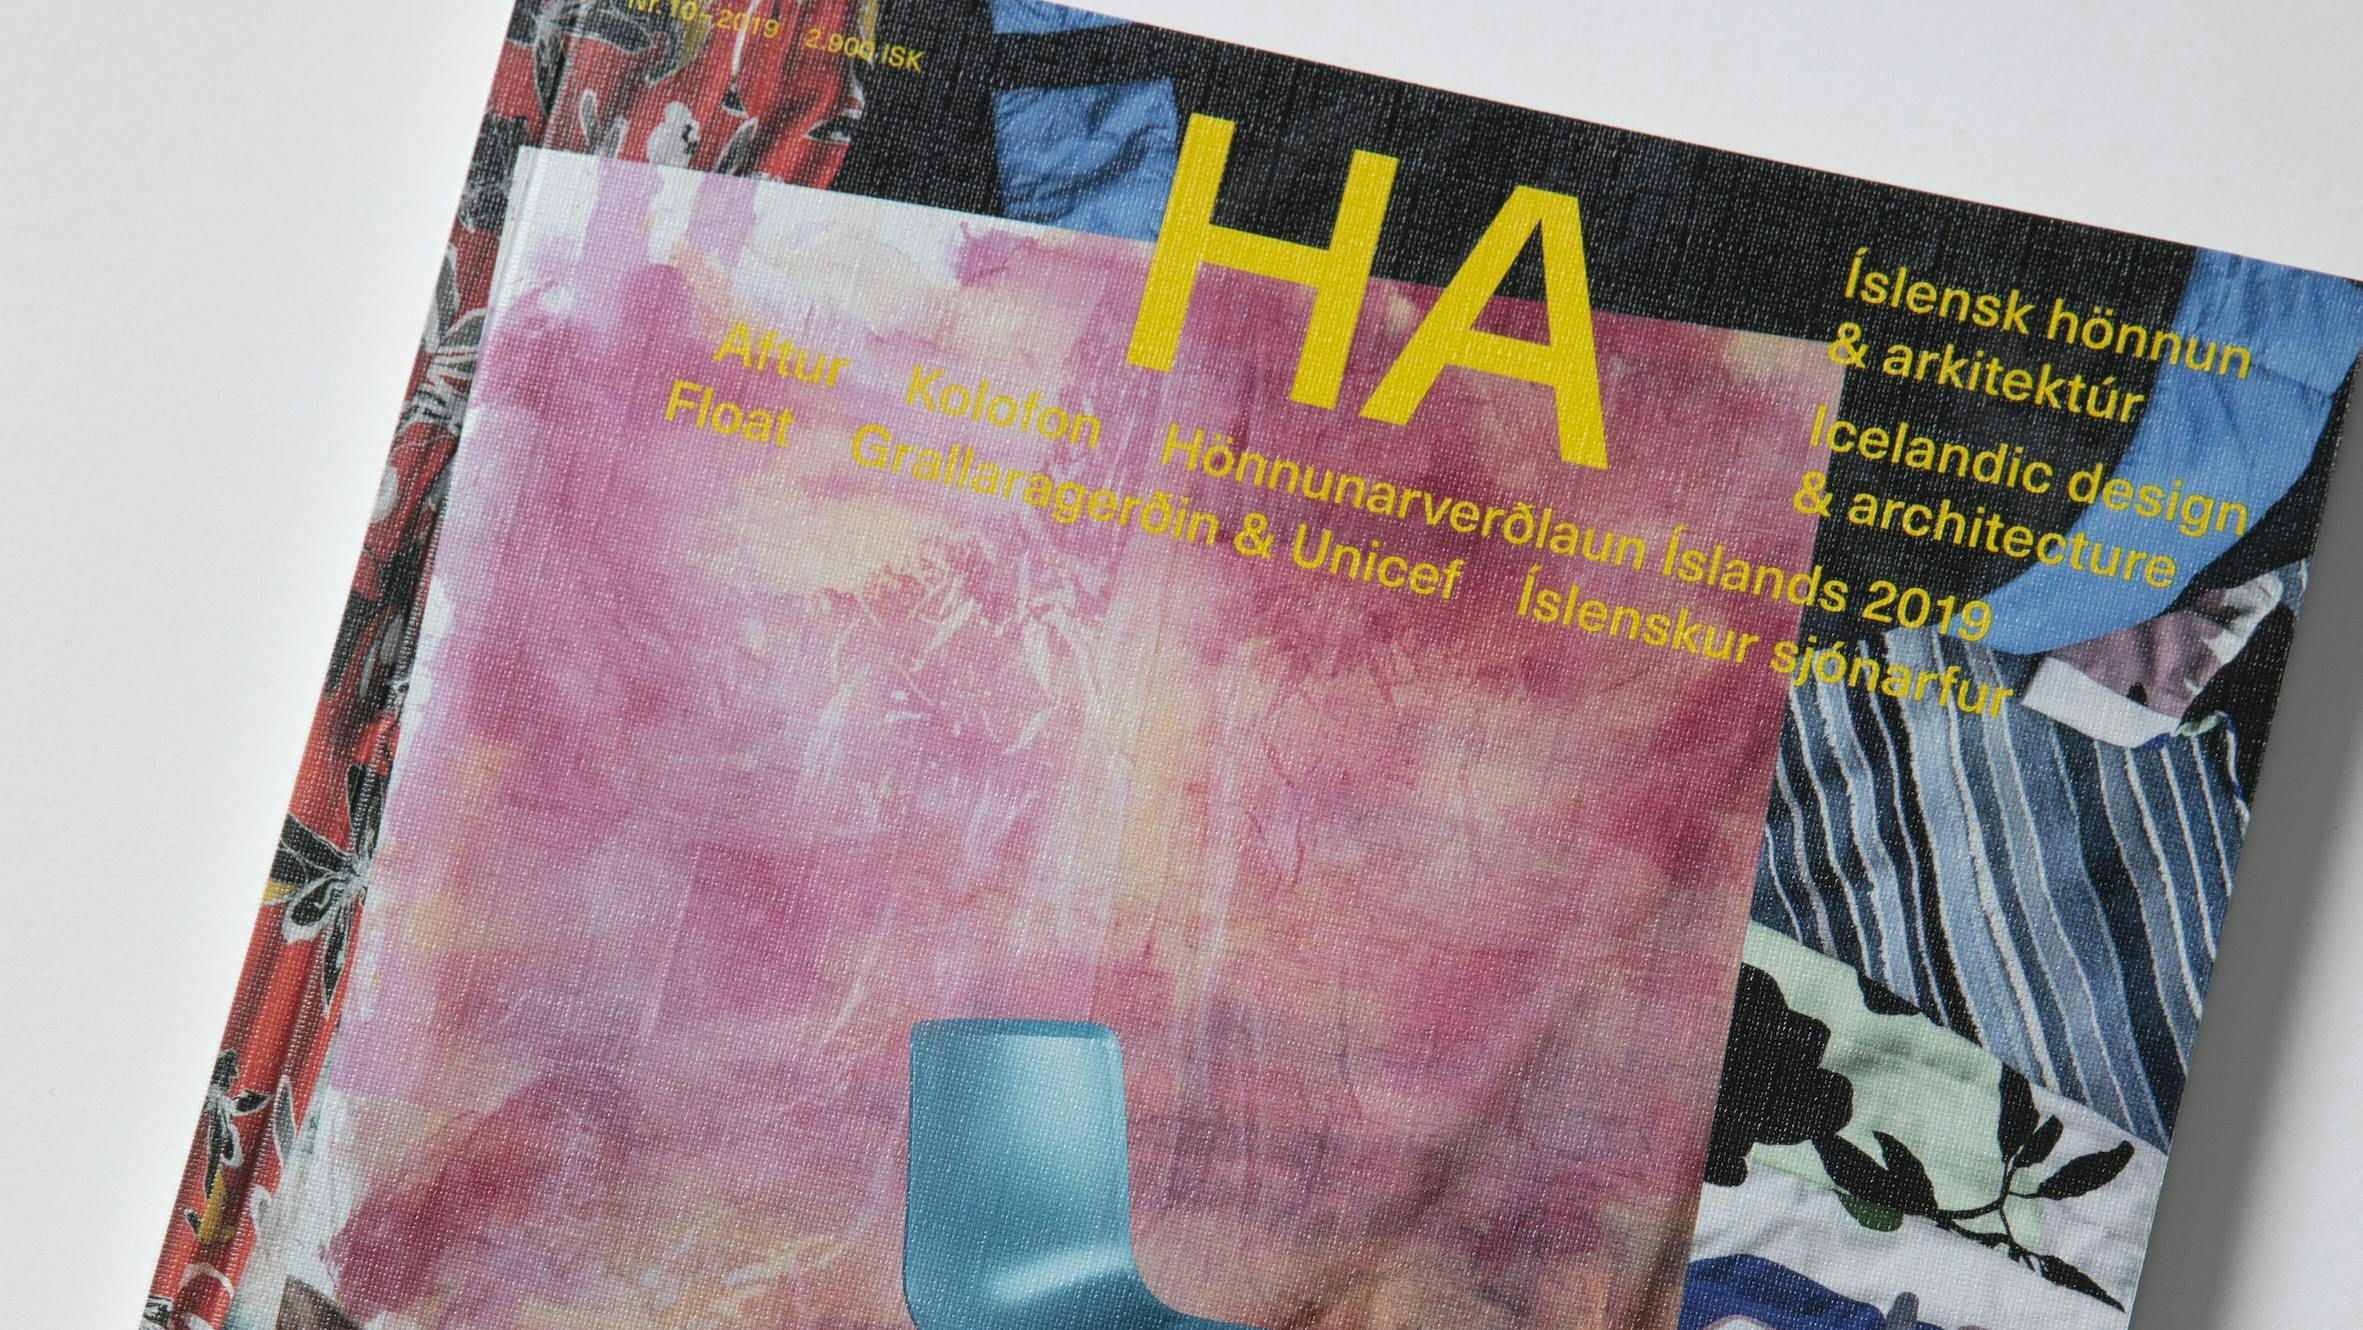 HA10 – Product picture of HA, Issue no. 10 published in November 2019.